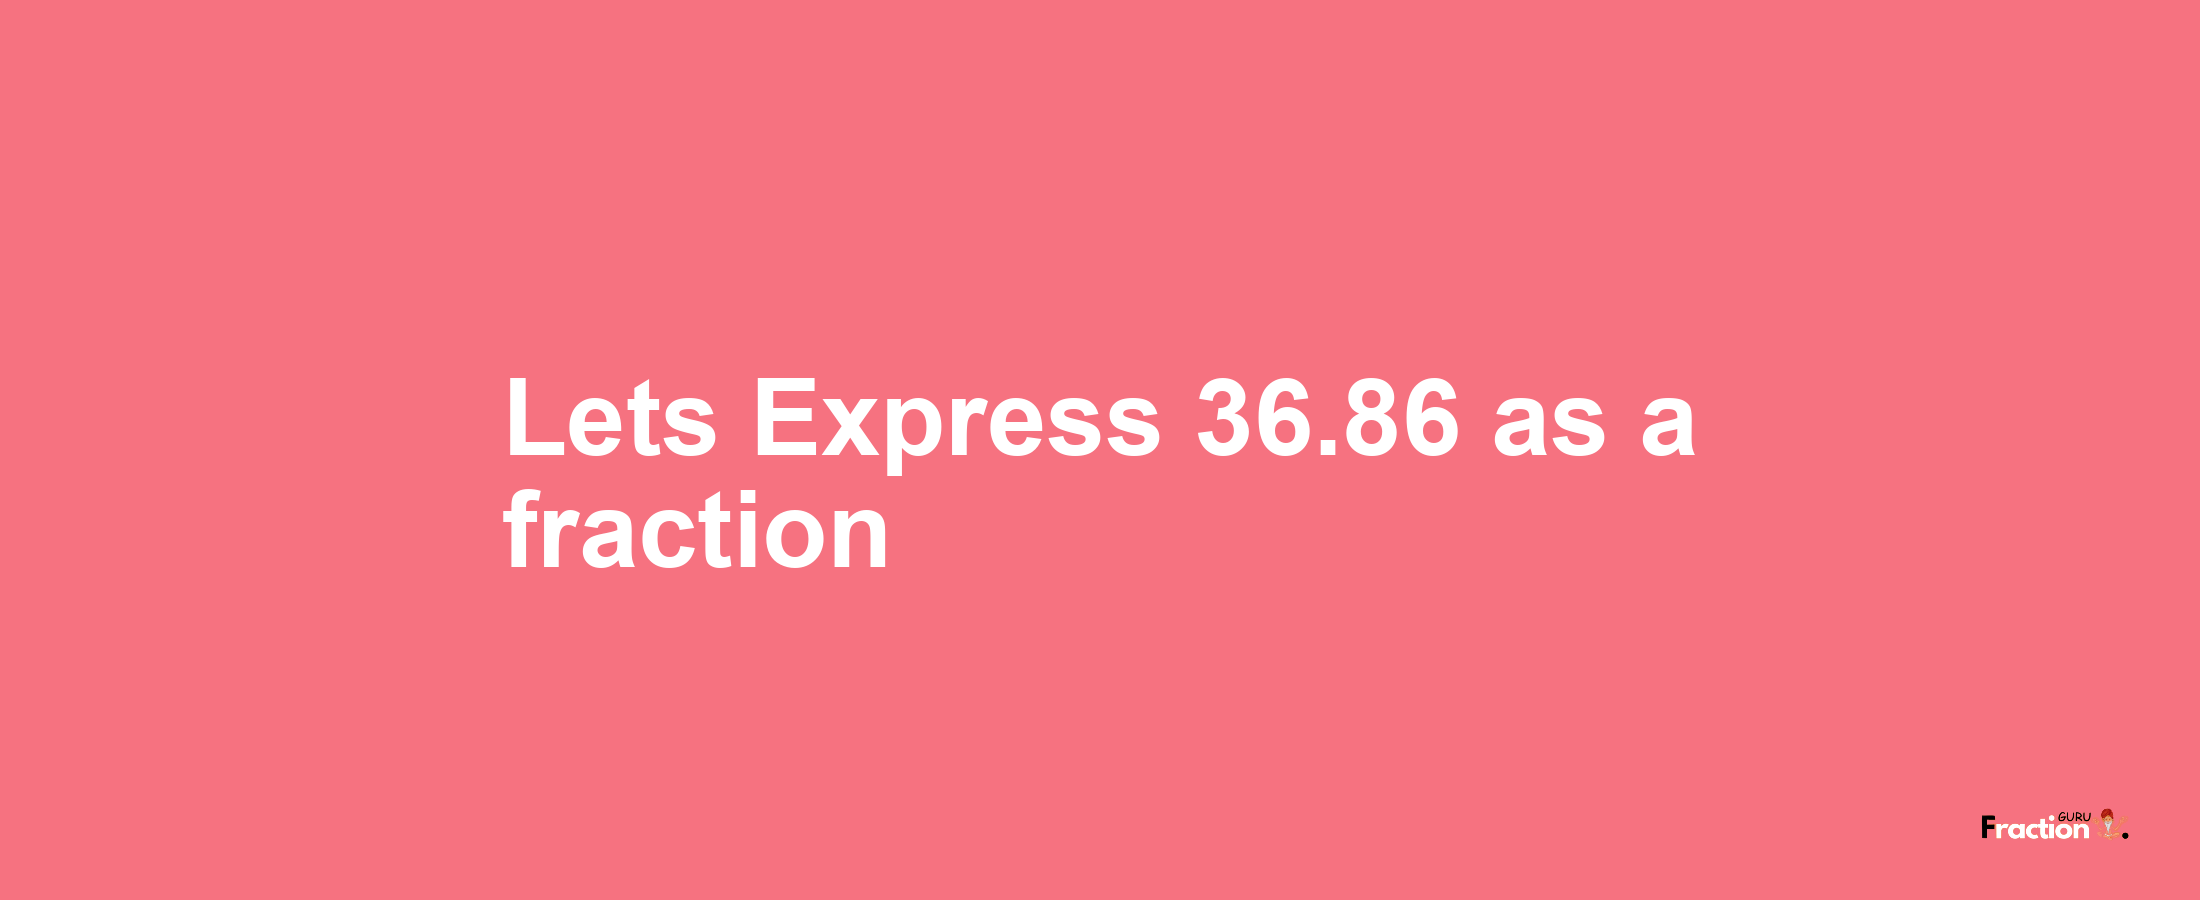 Lets Express 36.86 as afraction